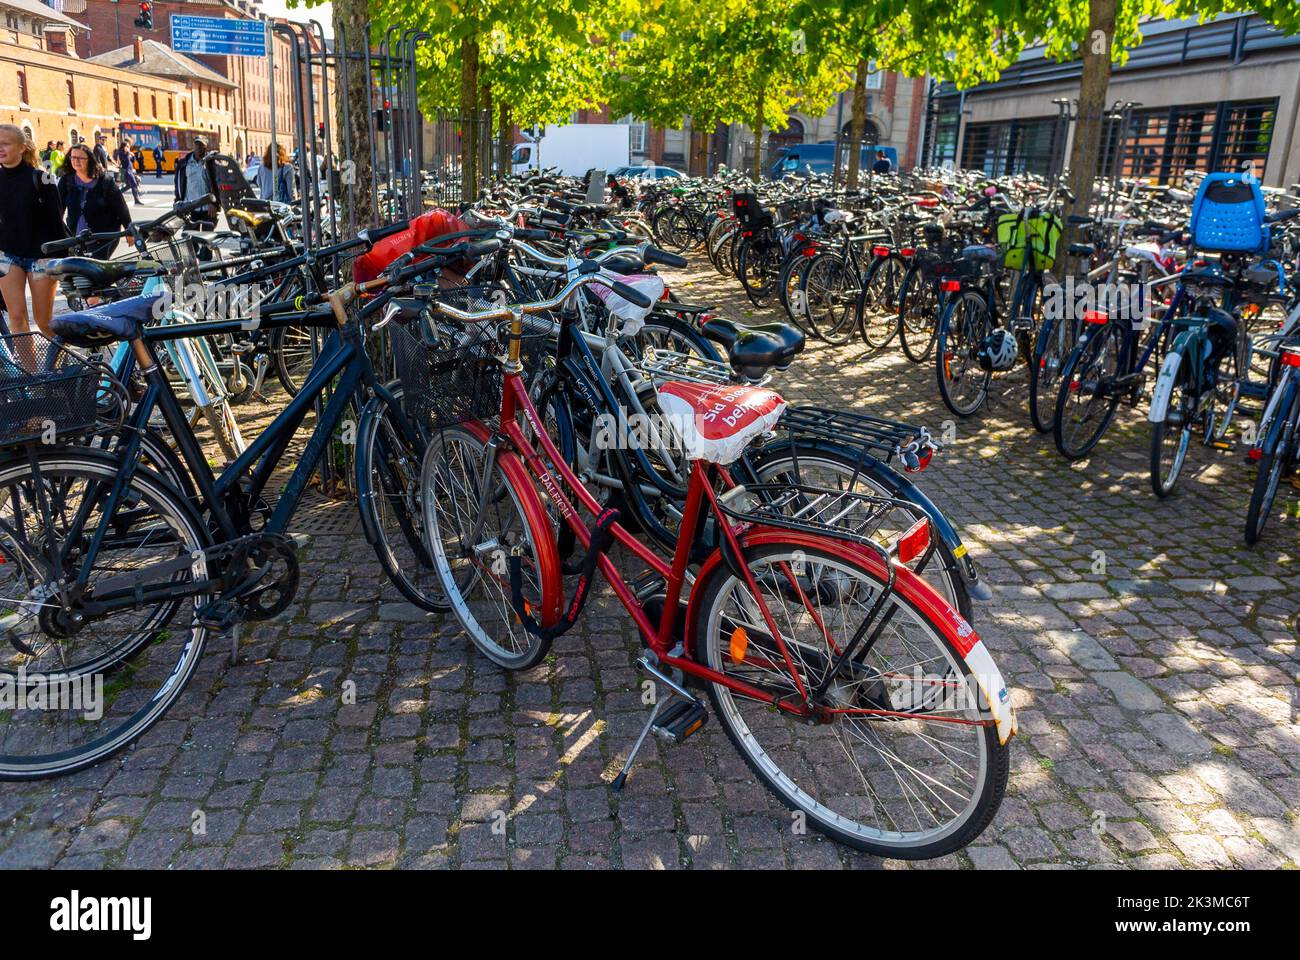 Copenhagen, Sweden, Large Group Bicycles at Pubic Parking Lot on Street, City Center Stock Photo